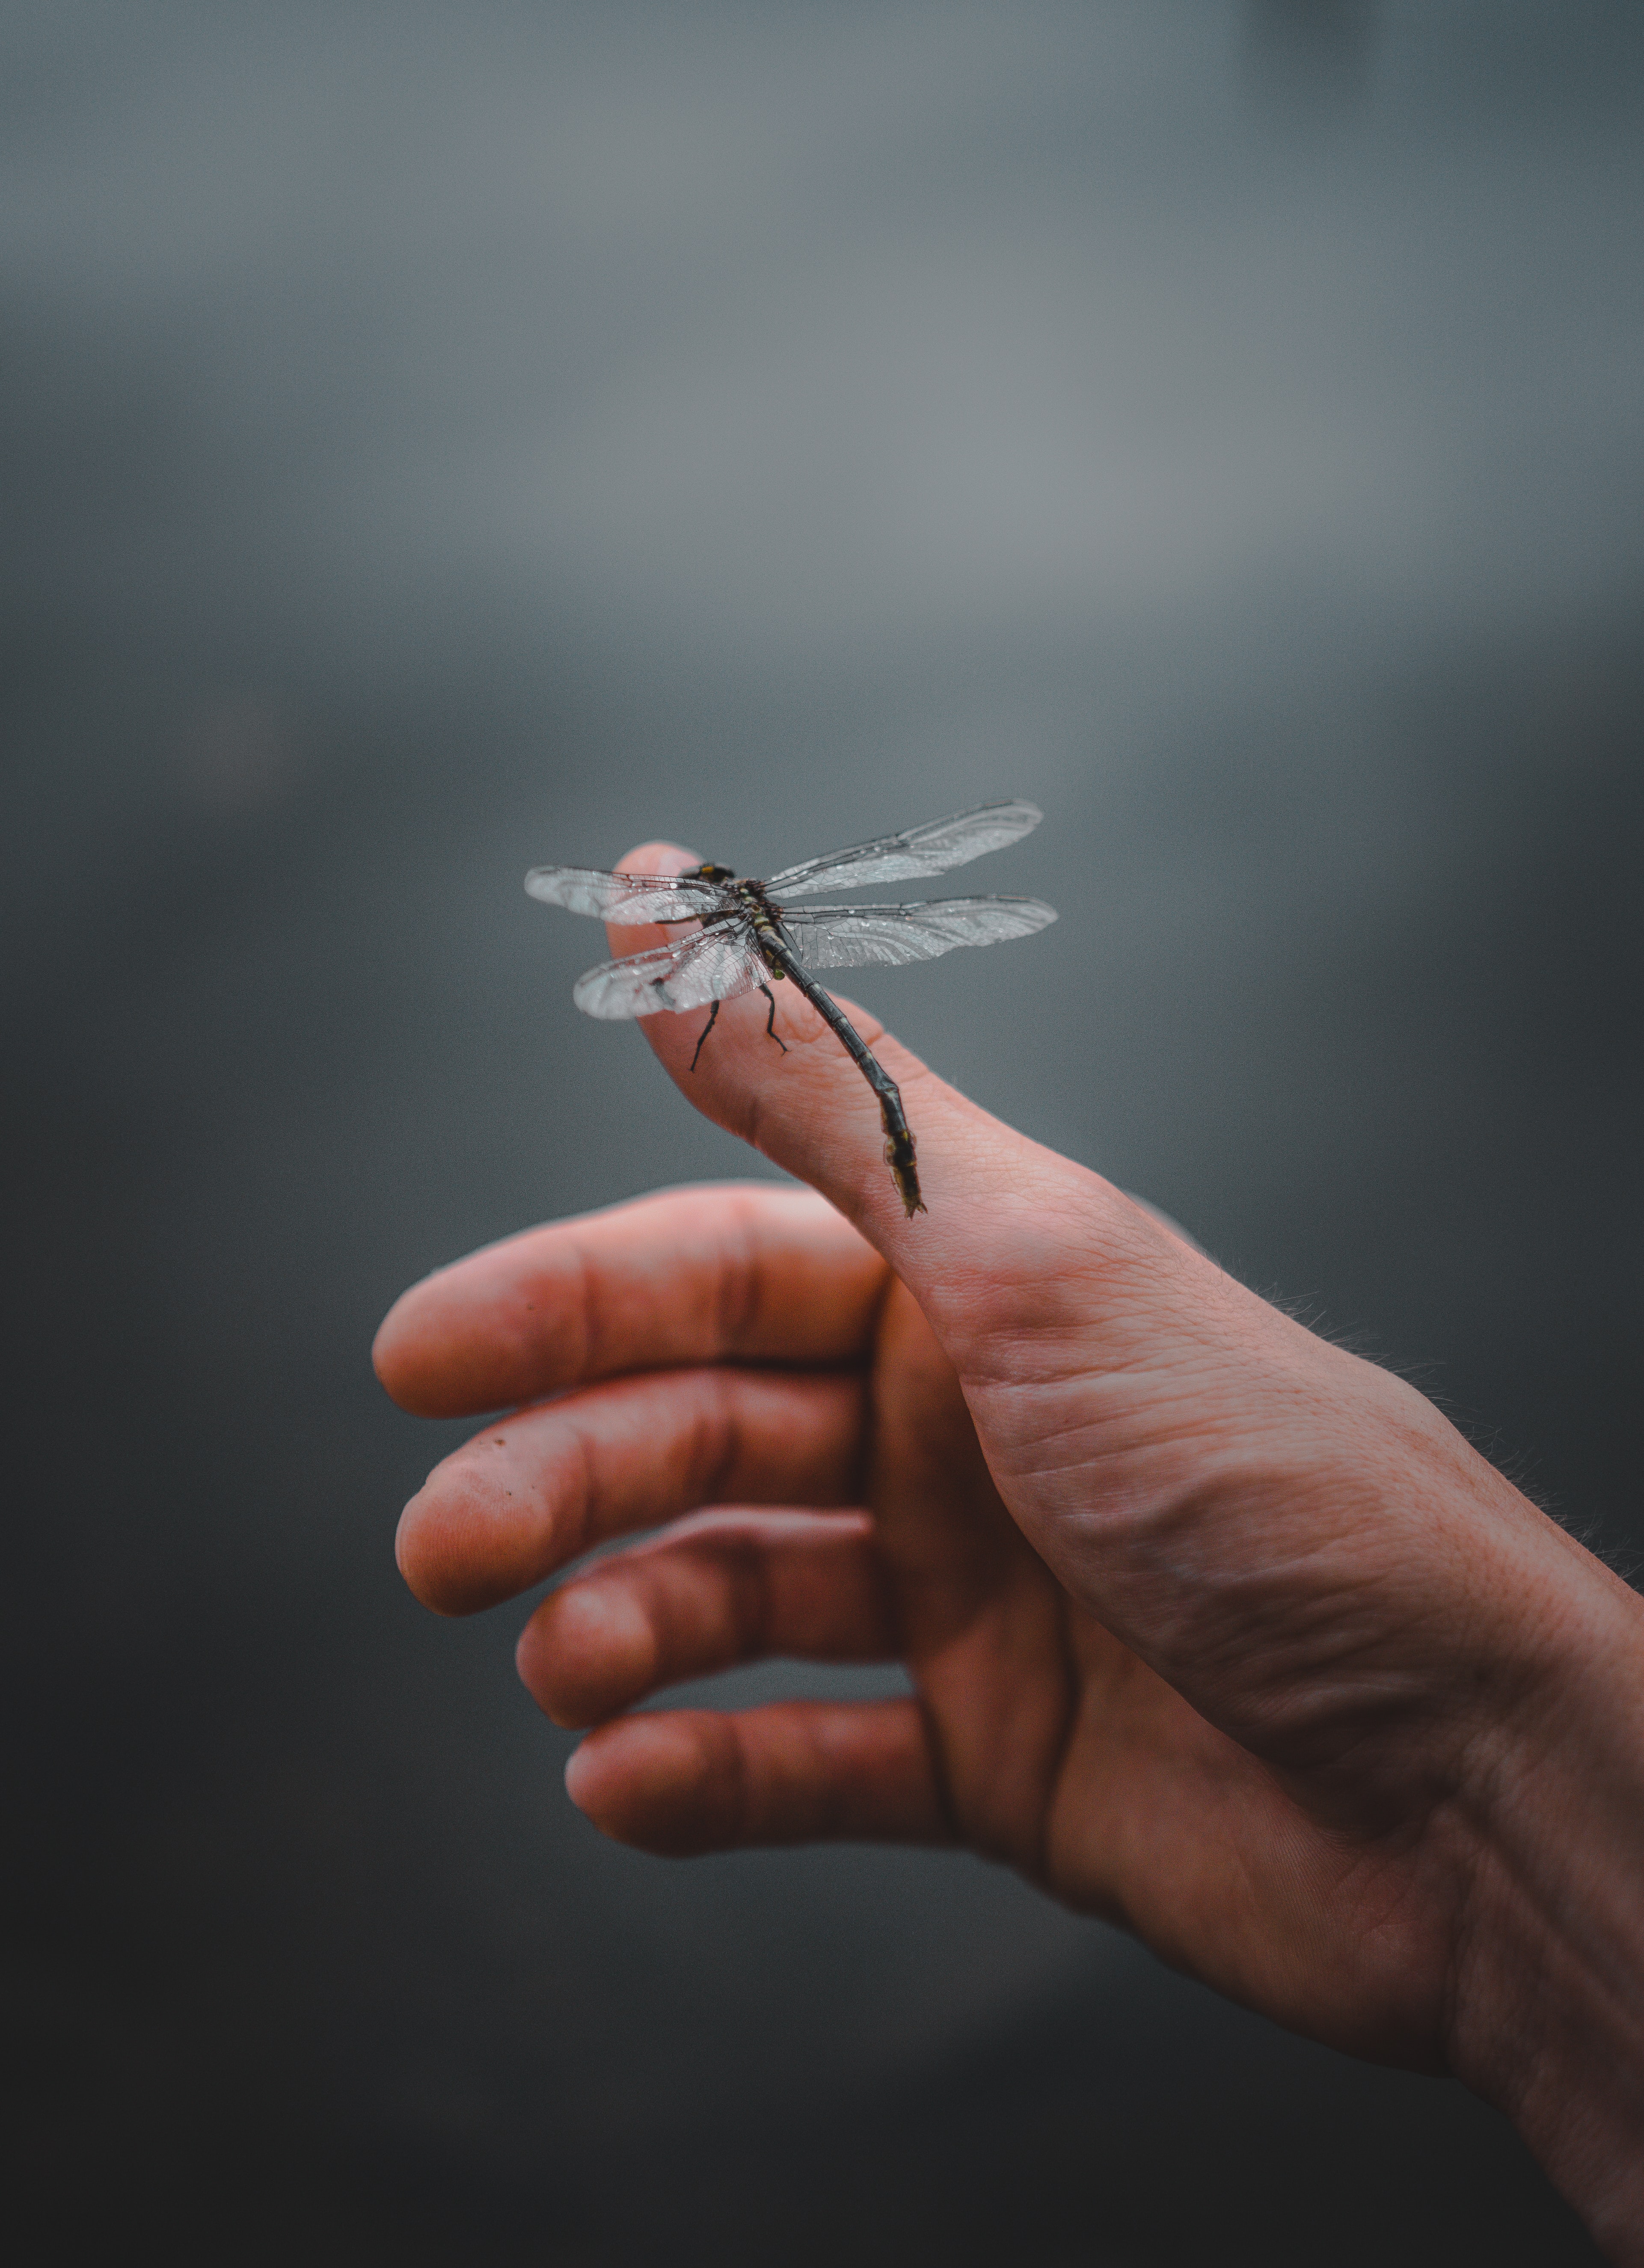 Free HD dragonfly, fingers, hand, miscellanea, miscellaneous, insect